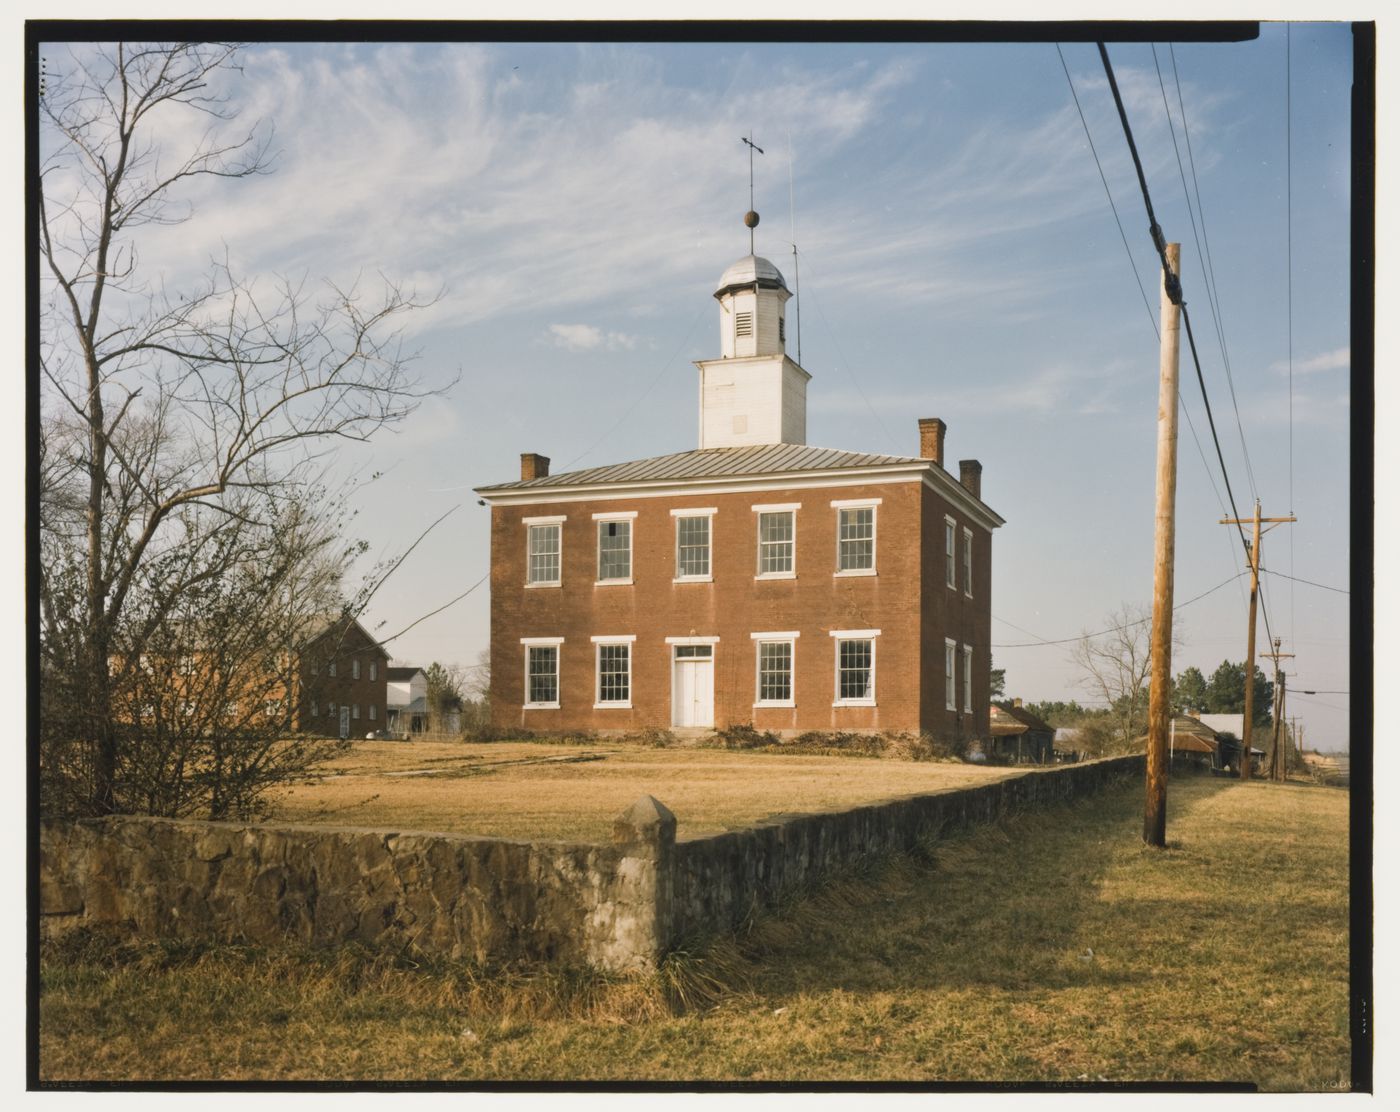 View of the Old Morgan County Courthouse, Somerville, Alabama